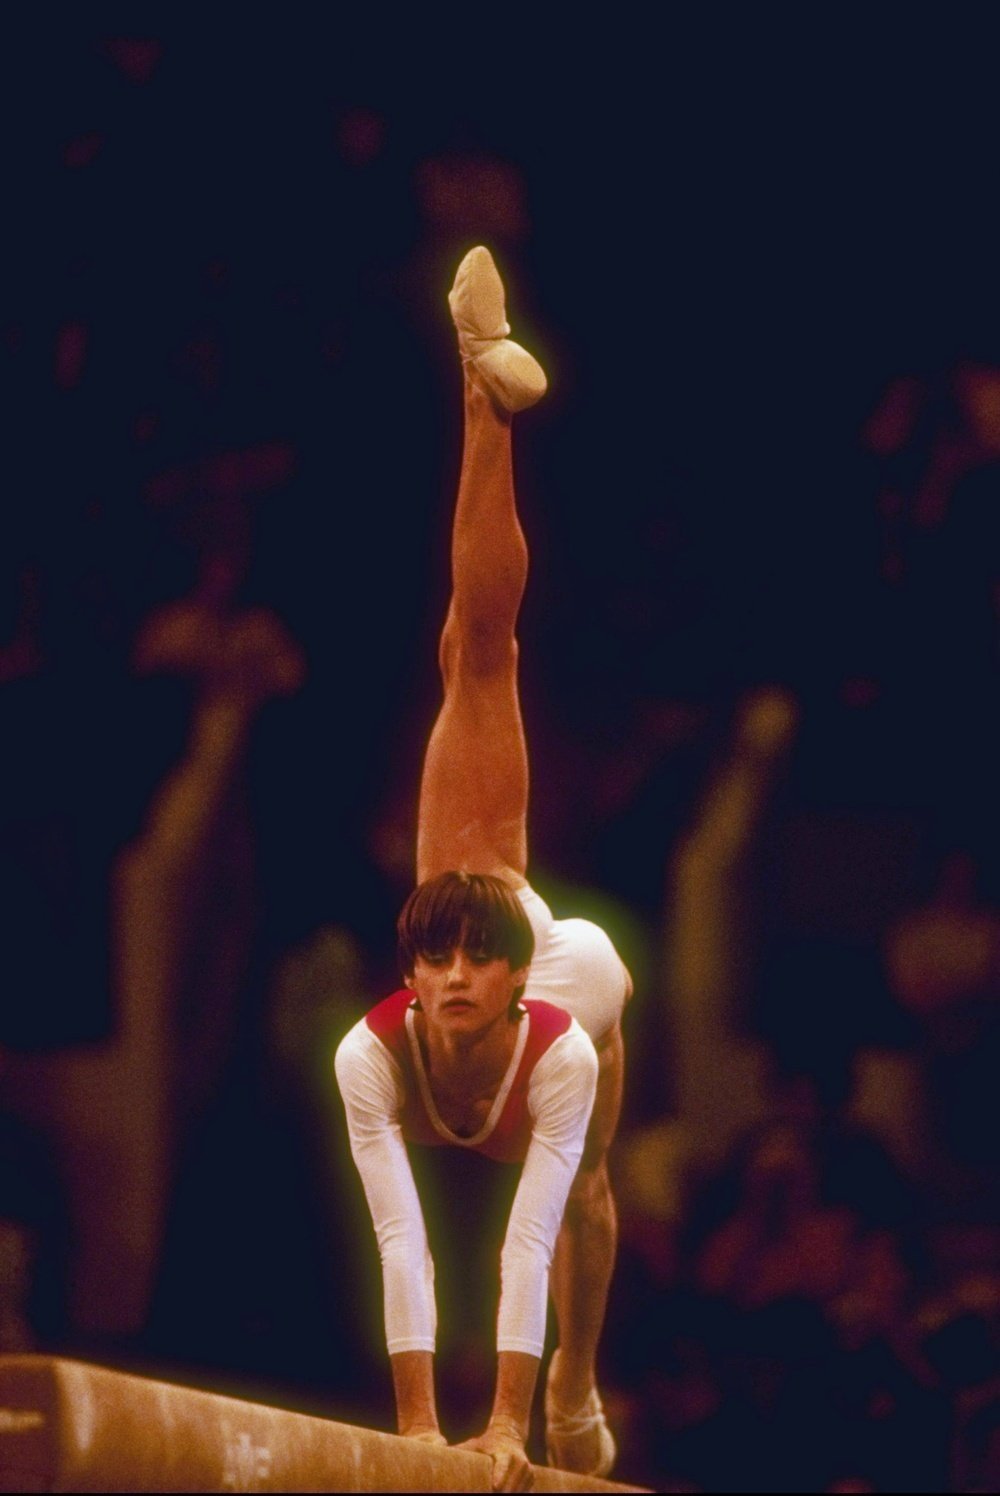 Nadia Comaneci does her routine on the balance beam.